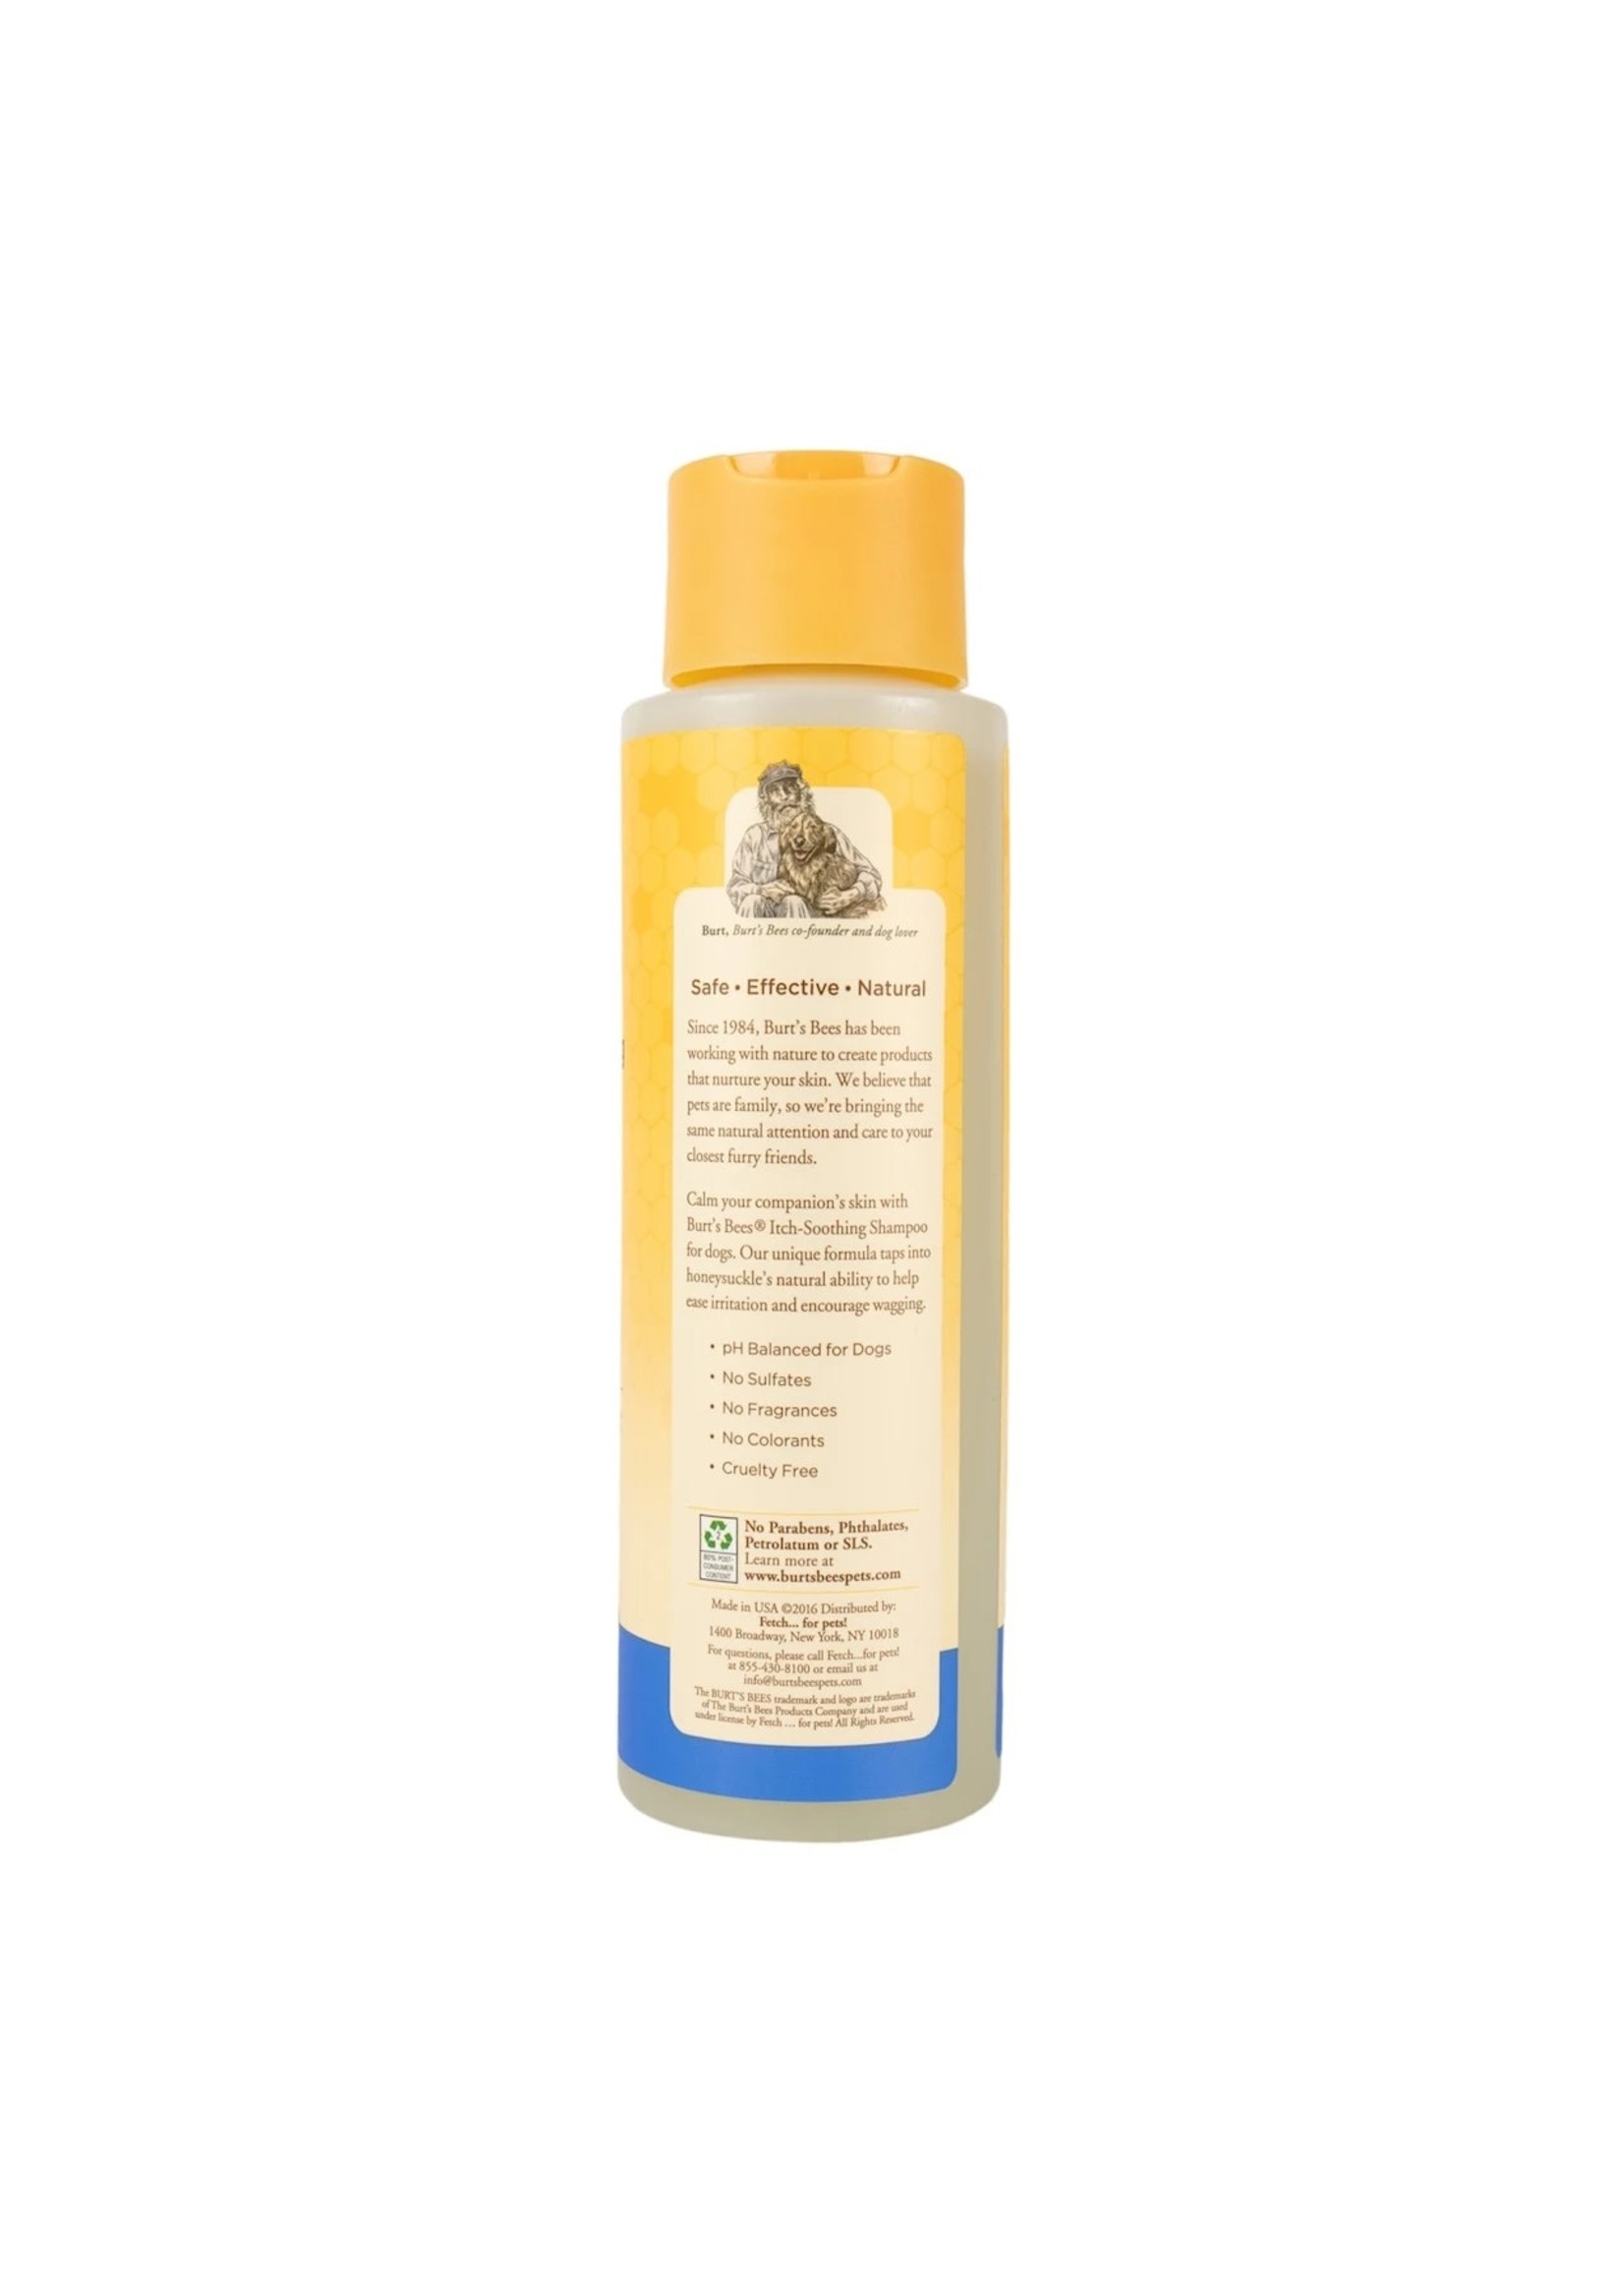 Burt's Bees Itch-Soothing Shampoo with Honeysuckle 16 oz